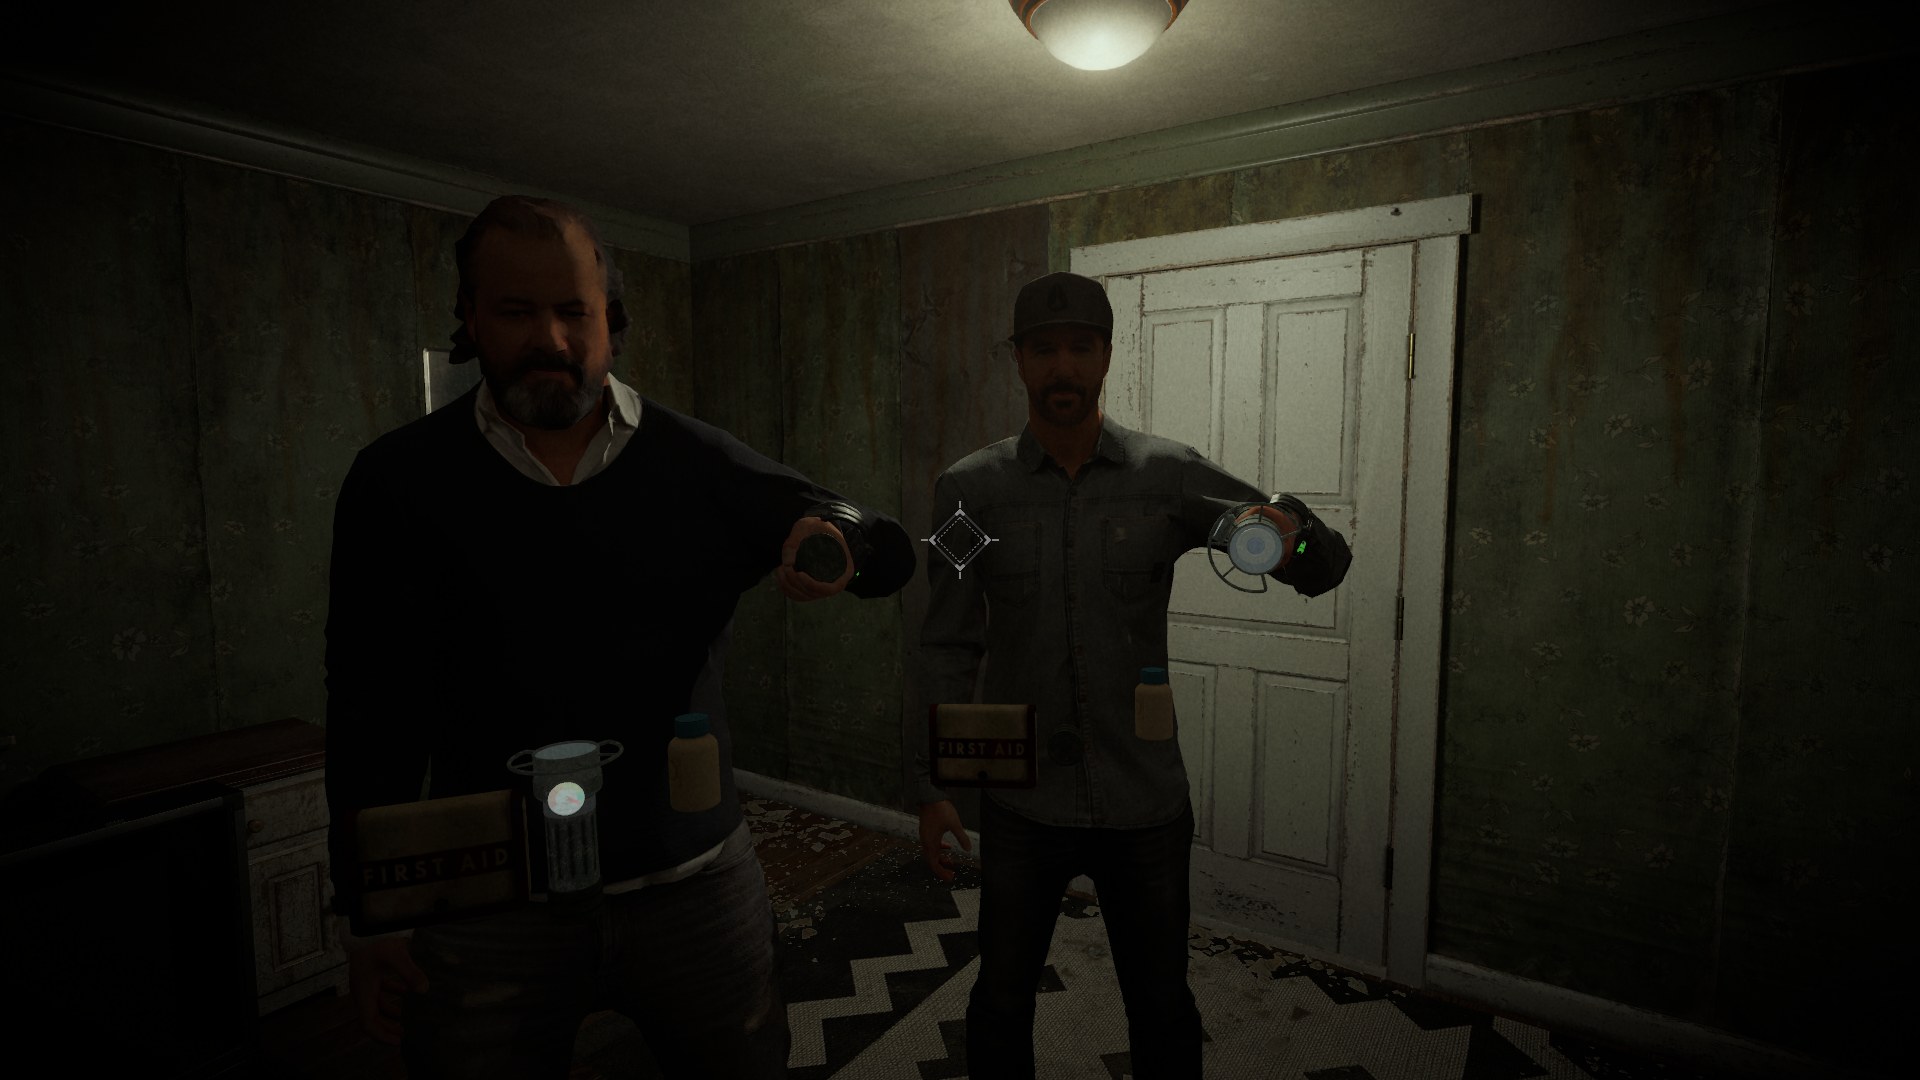 Screenshot of the game. Two player characters face the camera in a small, dark room, holding various equipment. 